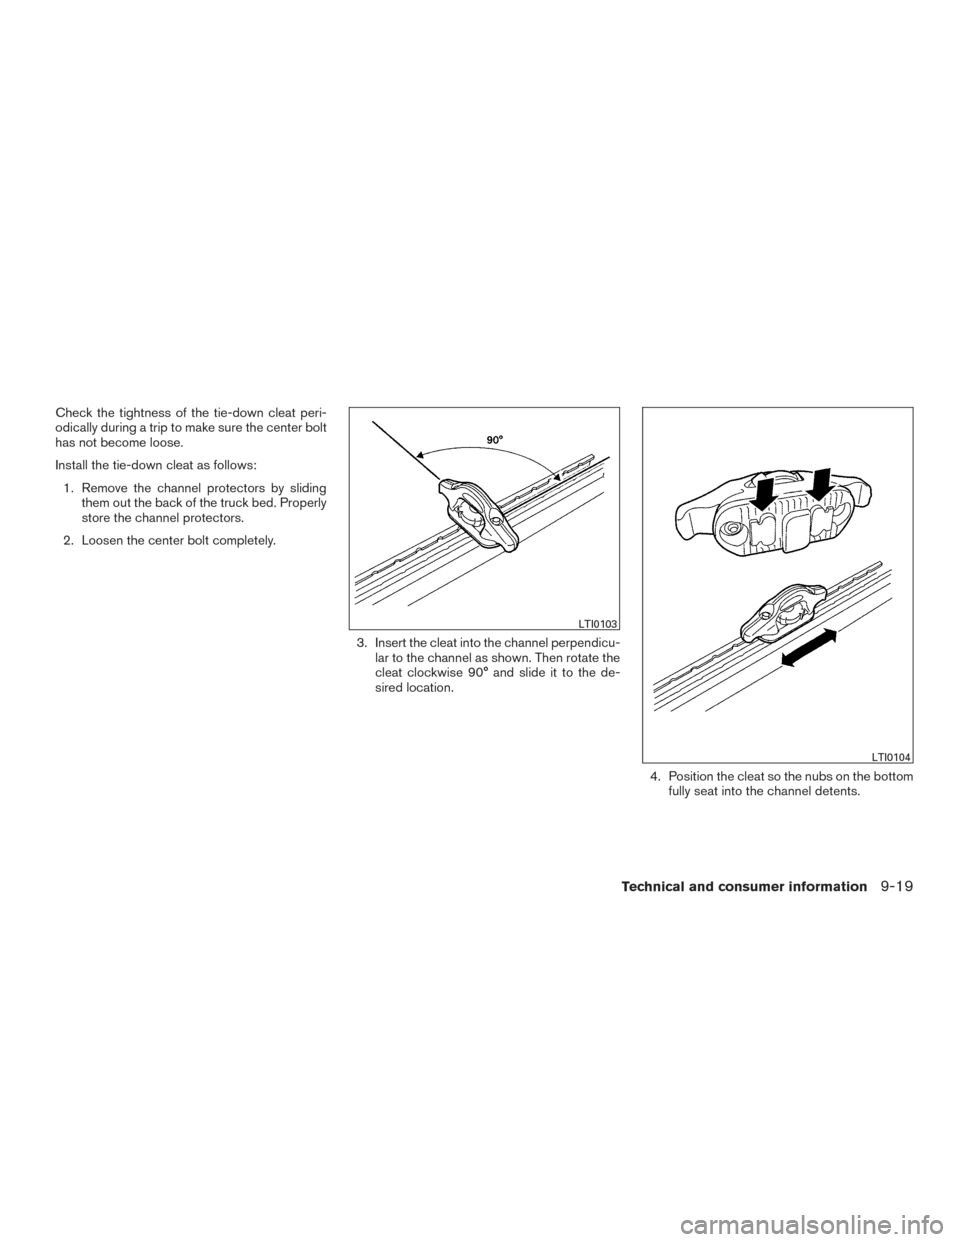 NISSAN TITAN 2015 1.G User Guide Check the tightness of the tie-down cleat peri-
odically during a trip to make sure the center bolt
has not become loose.
Install the tie-down cleat as follows:1. Remove the channel protectors by slid